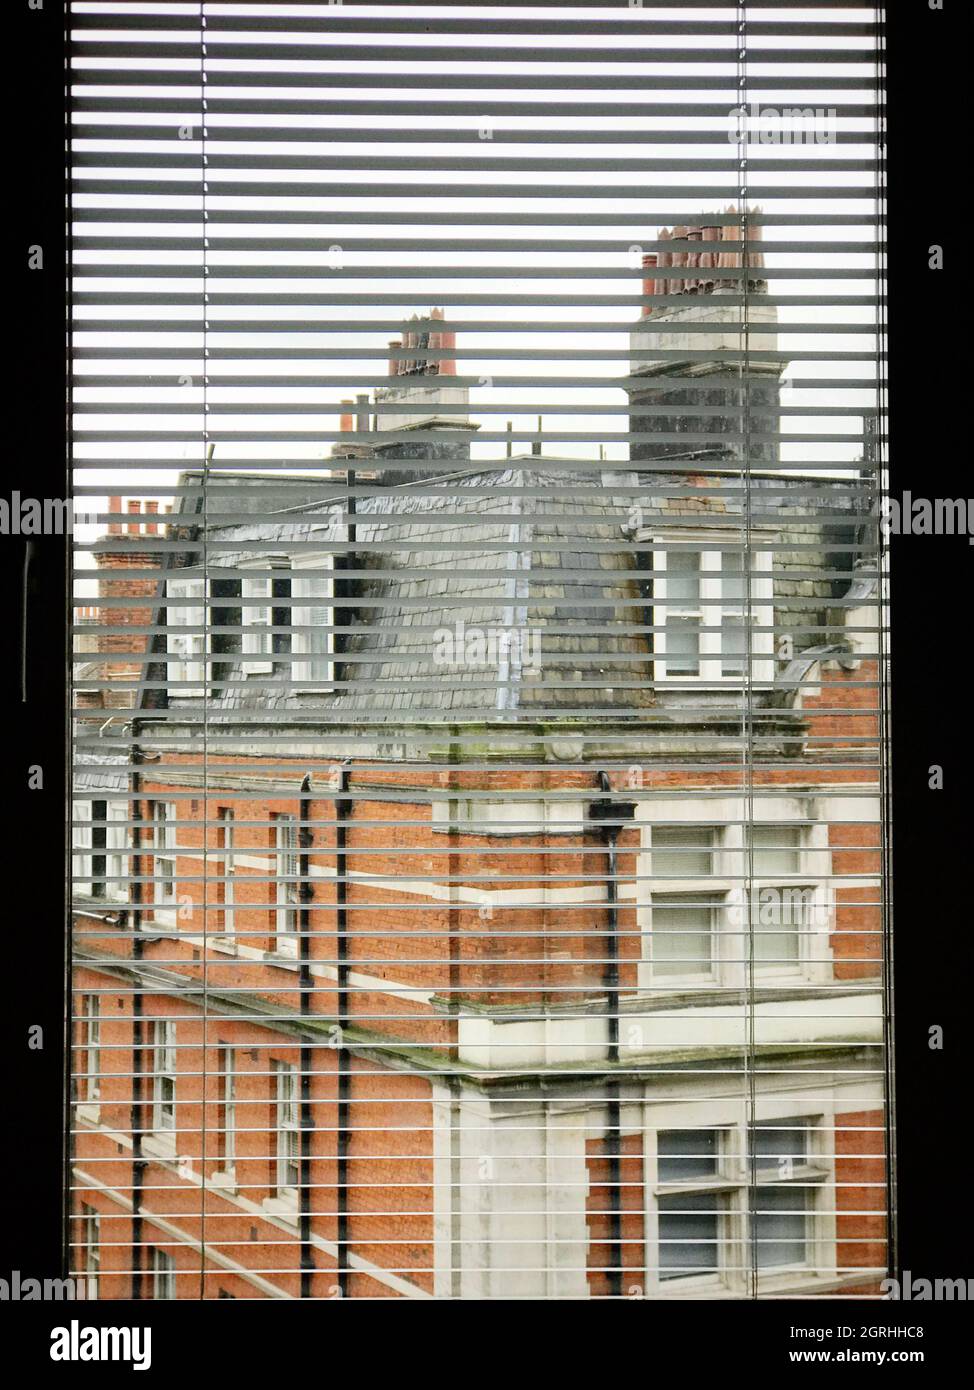 Residential Building Seen Through Window Blinds Stock Photo